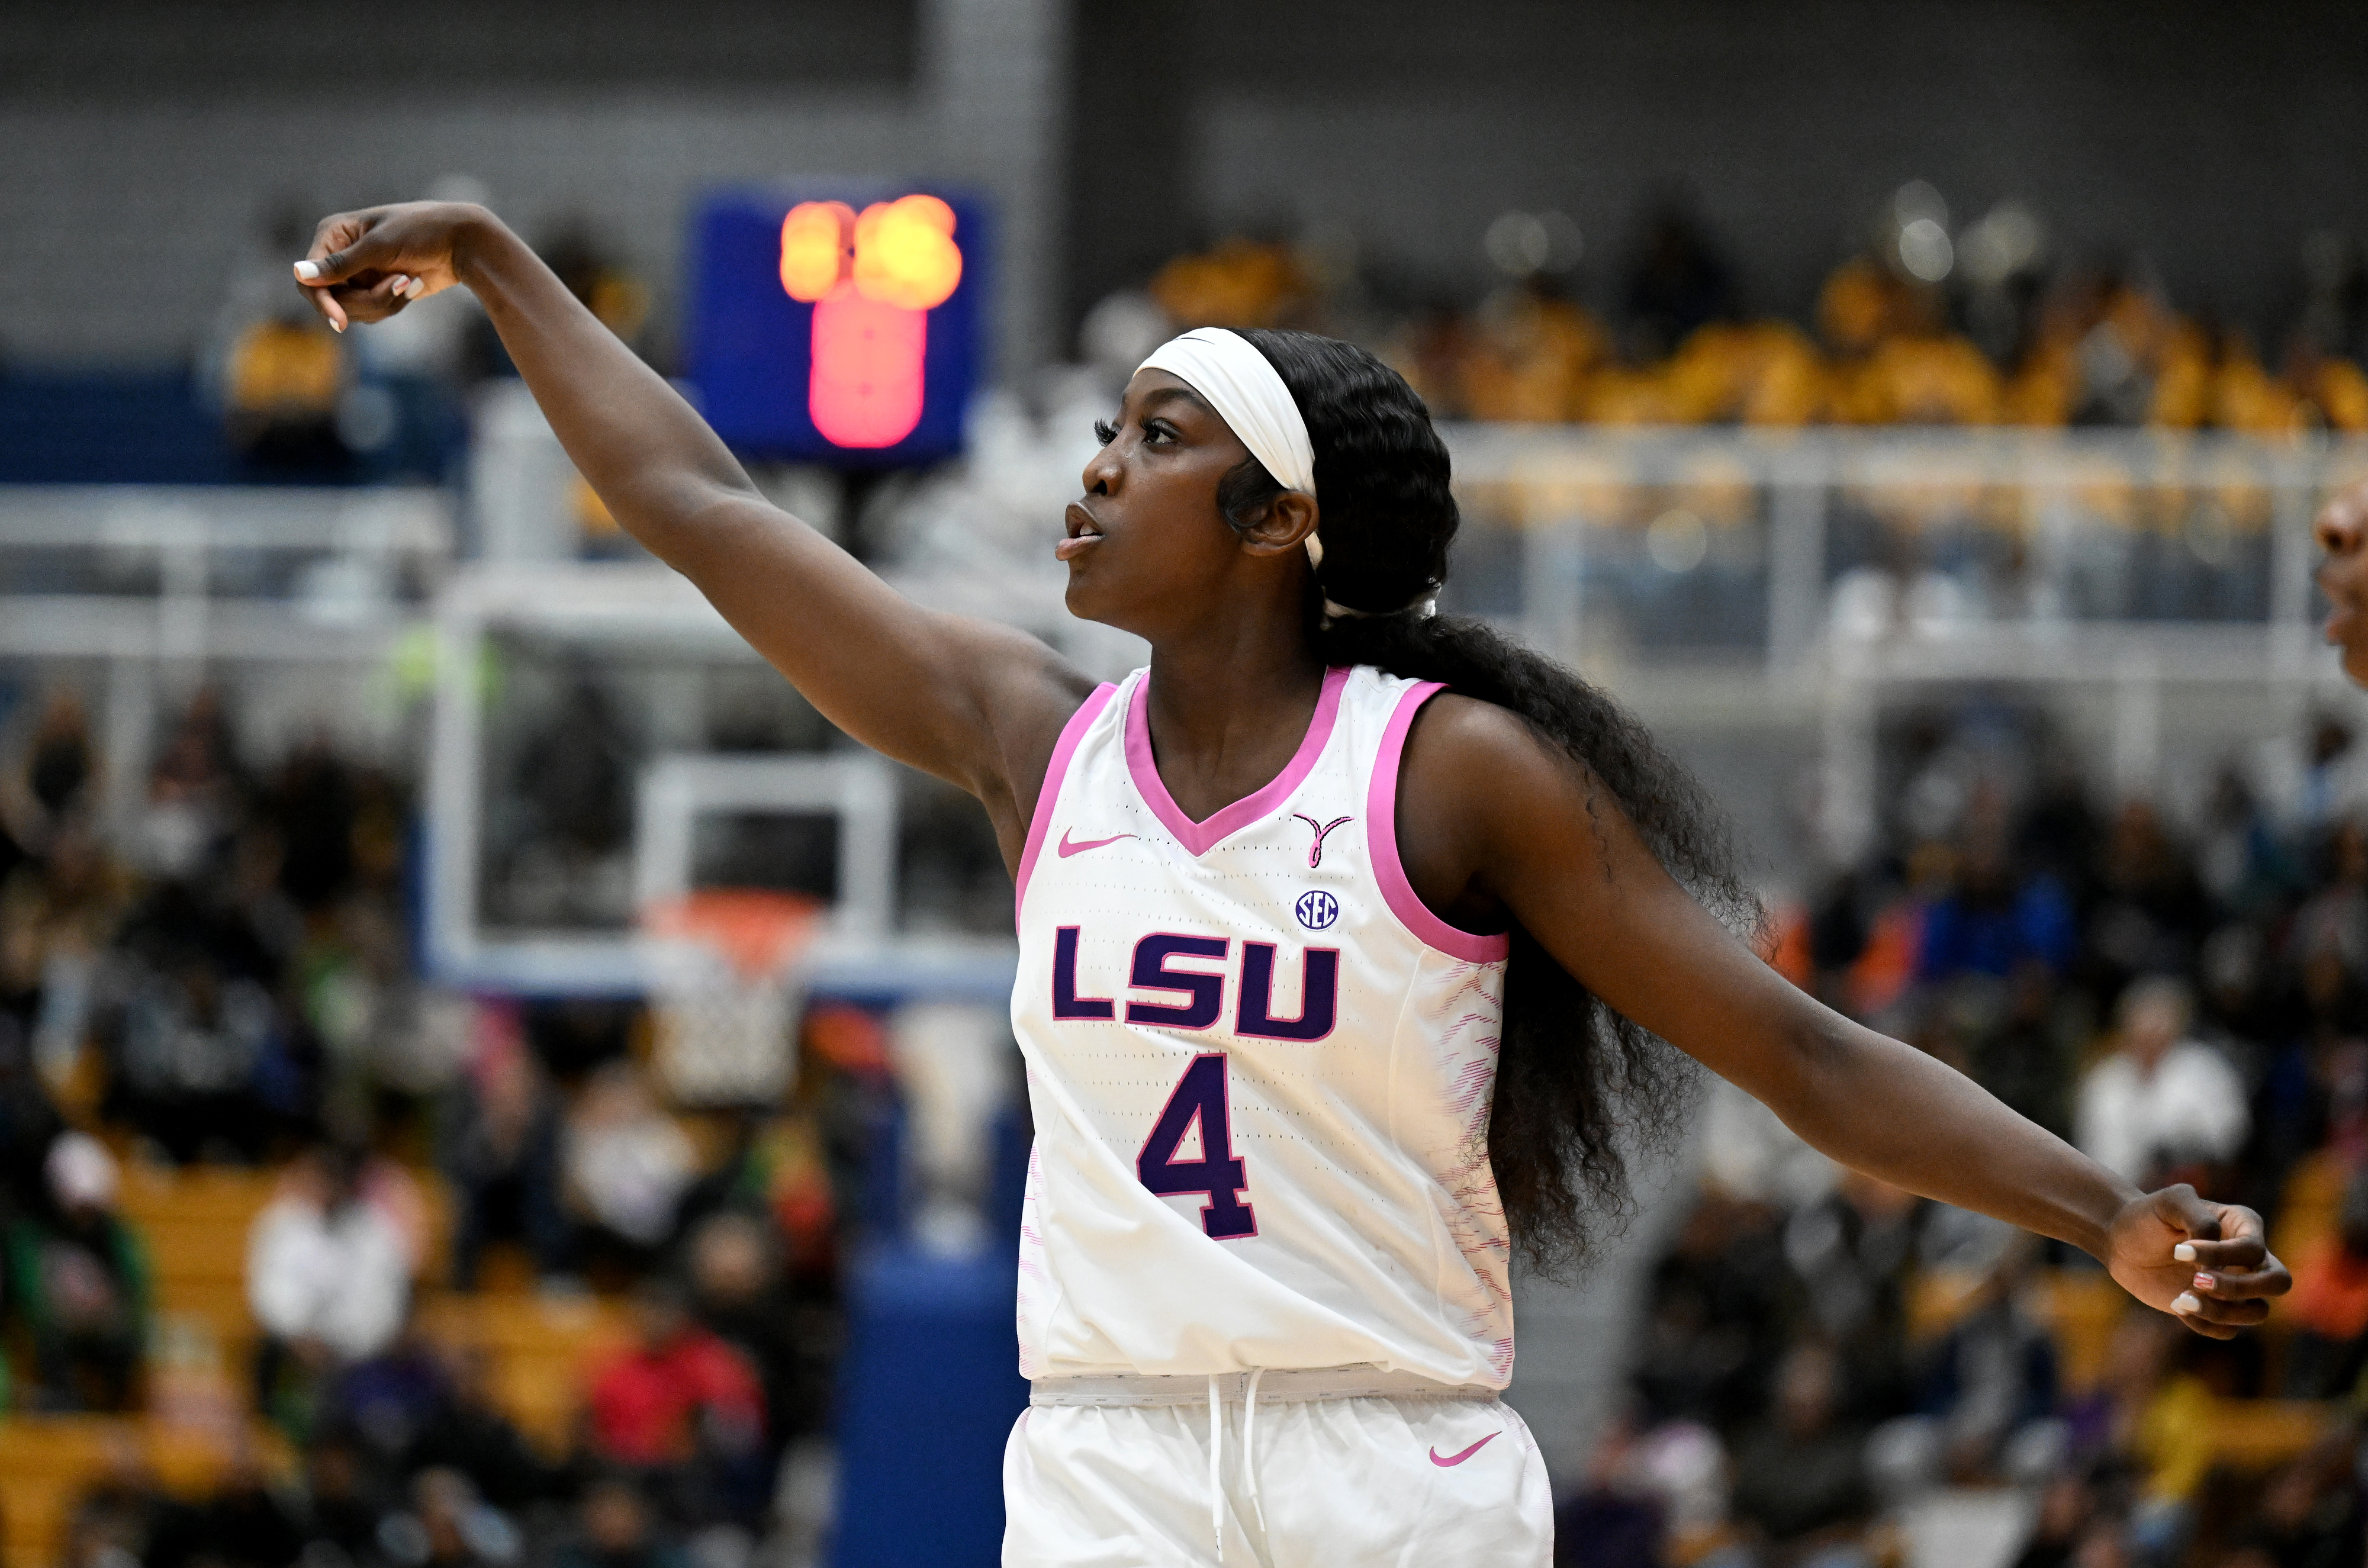 LSU basketball player in action on the court, wearing team uniform with the number 4